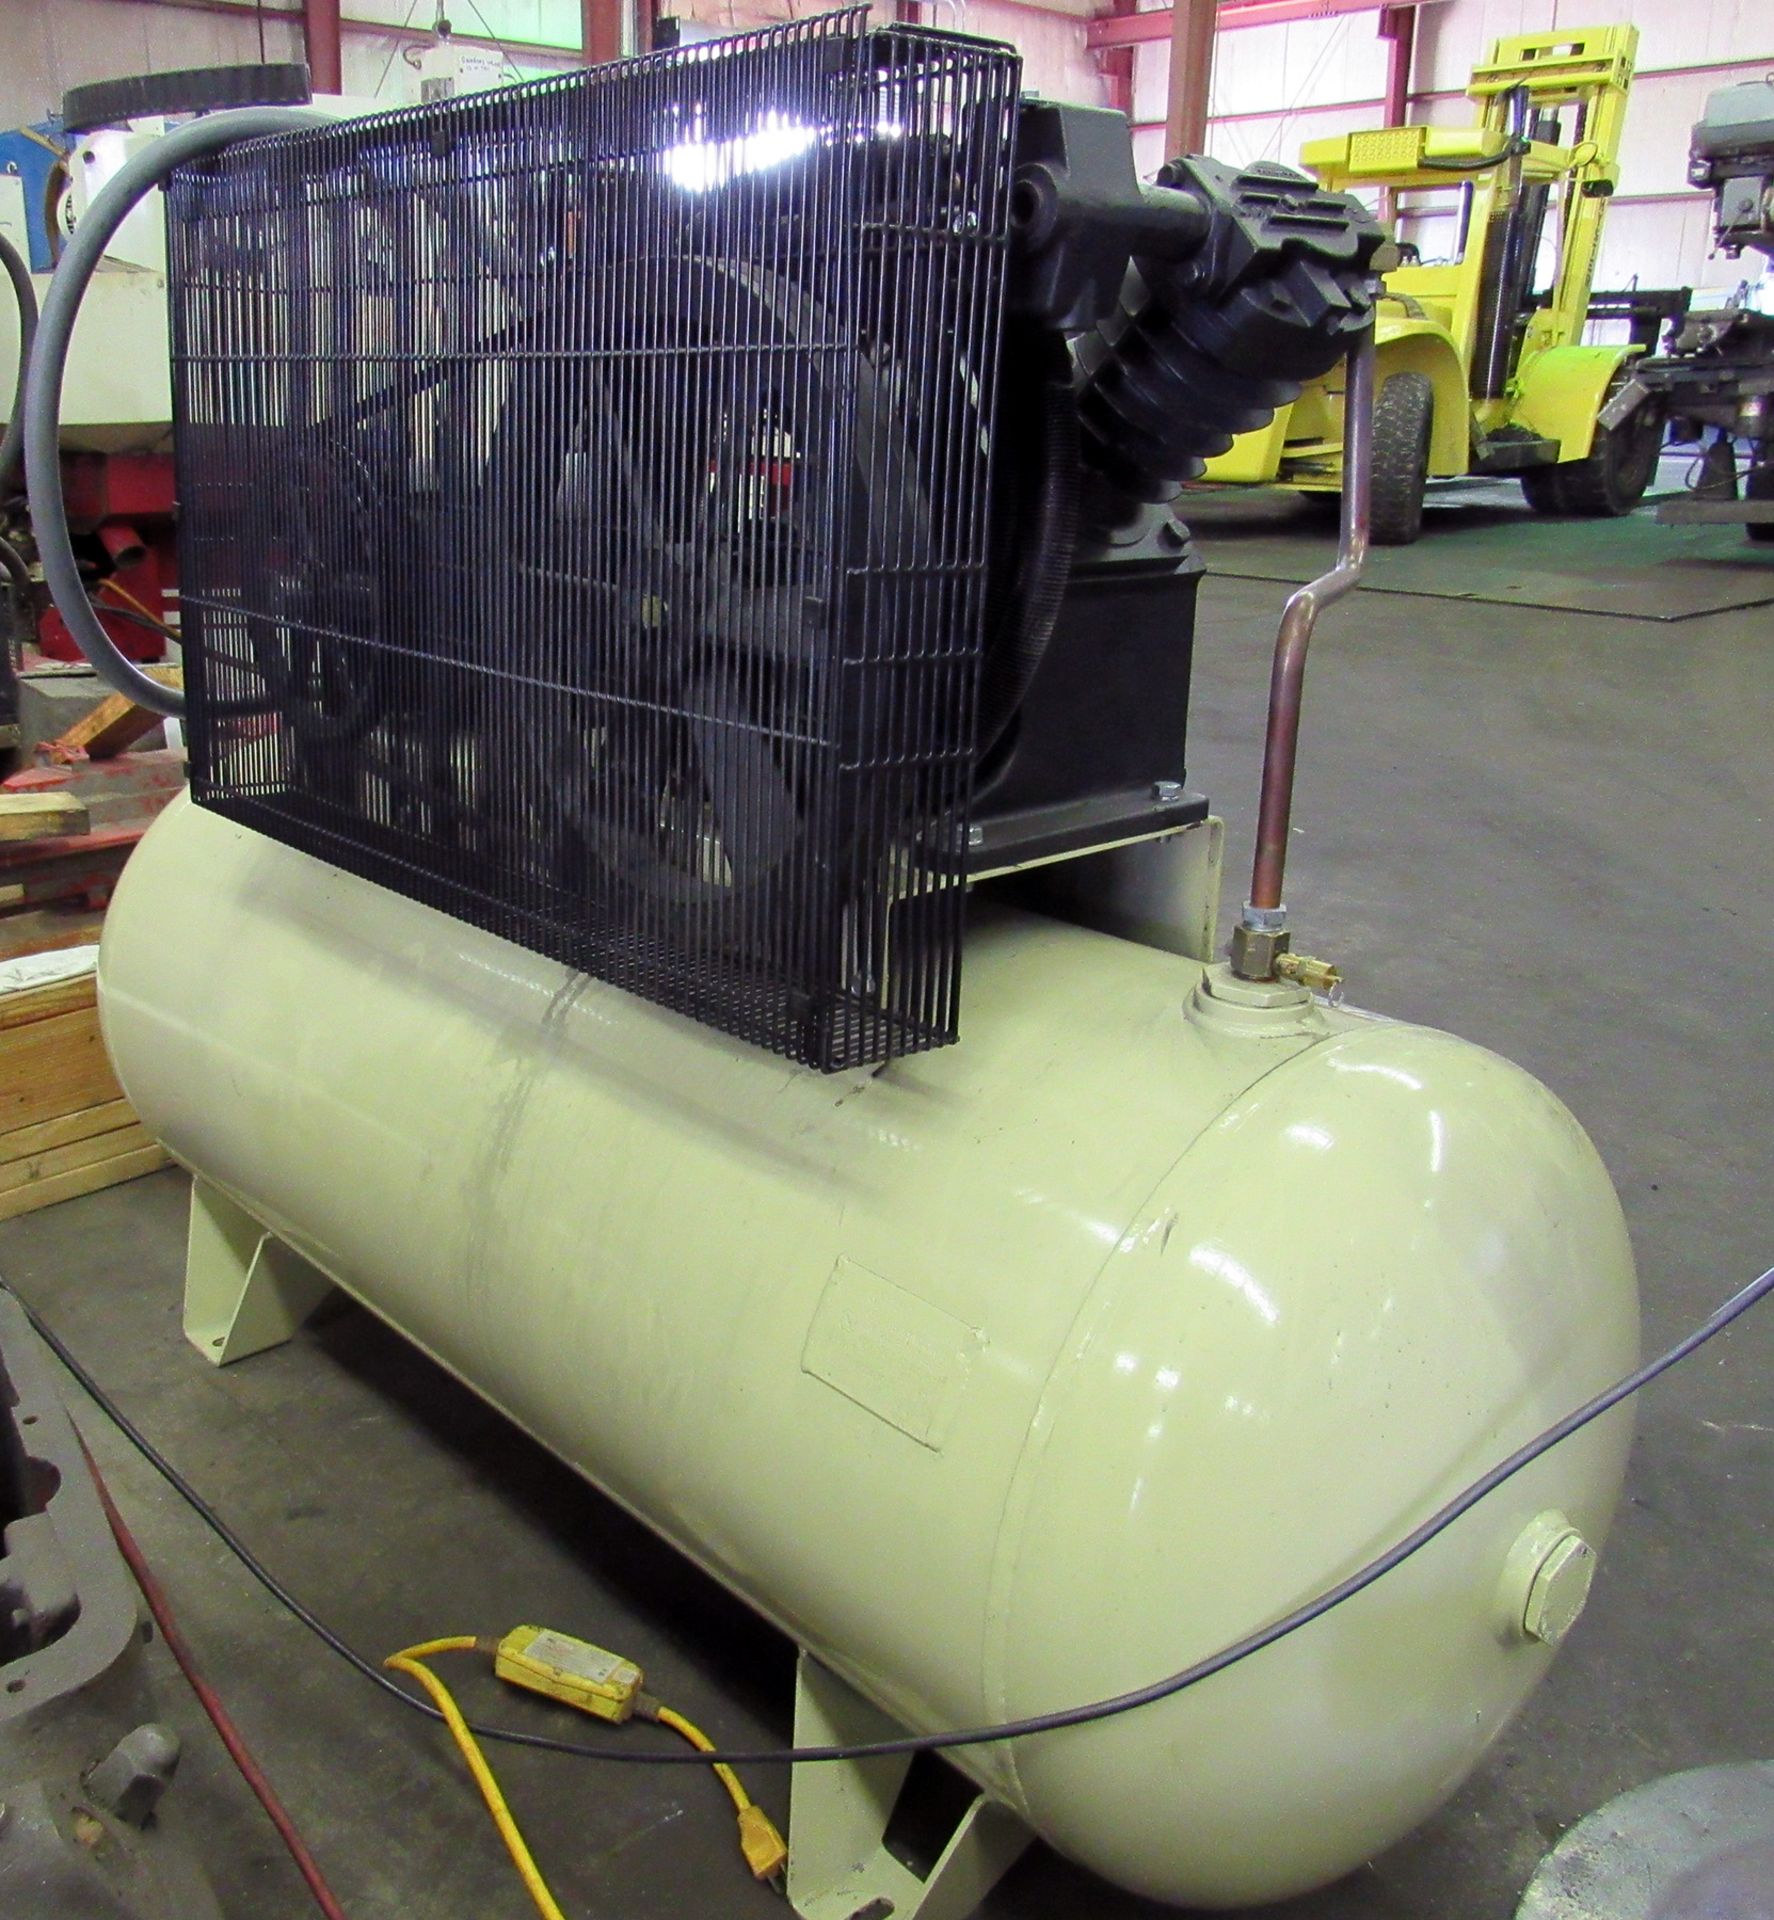 INGERSOLL RAND MODEL 2545 TANK MOUNTED AIR COMPRESSOR - Image 4 of 7